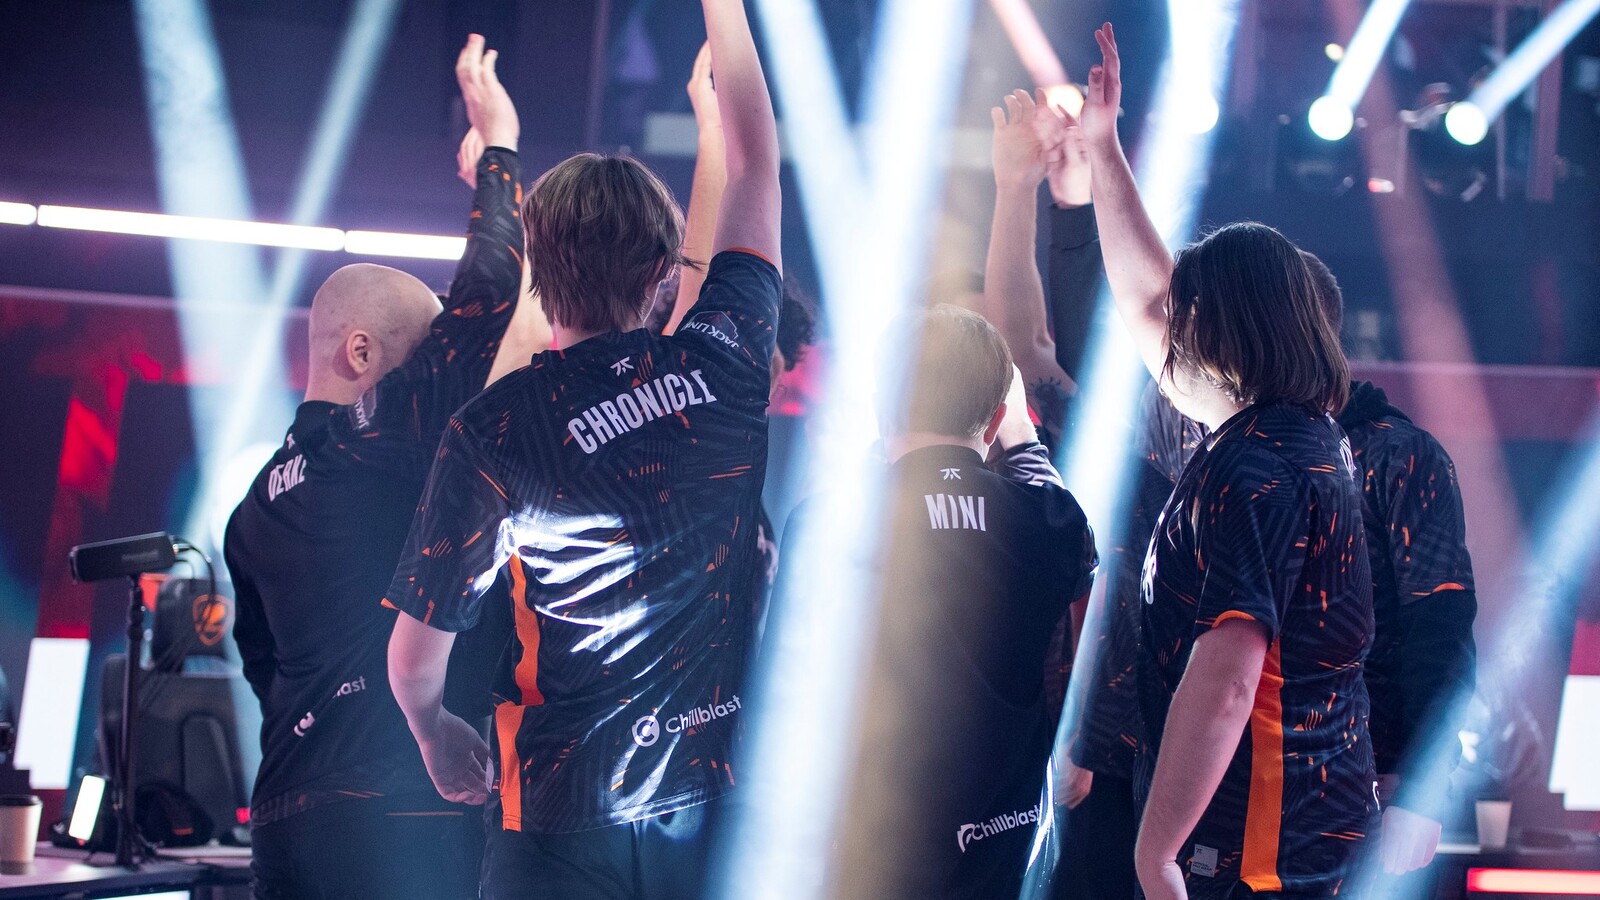 Fnatic finishes VCT EMEA undefeated with perfect 9-0 record – Egaxo